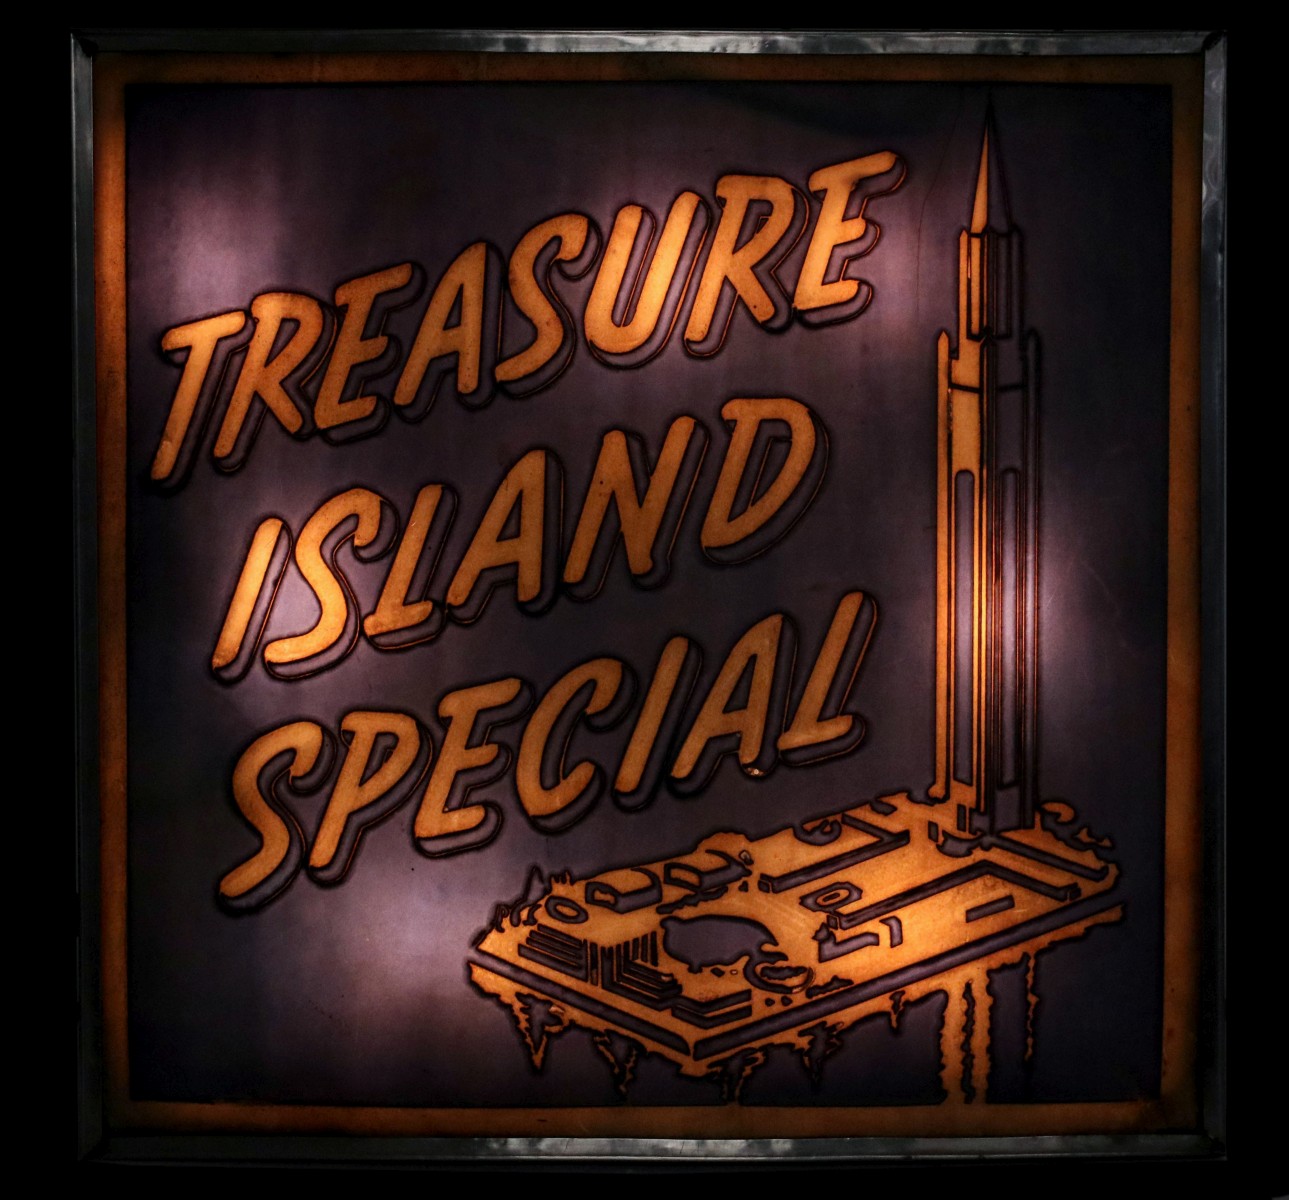 VERY RARE UP RR TREASURE ISLAND SPECIAL EXPO TAIL SIGN